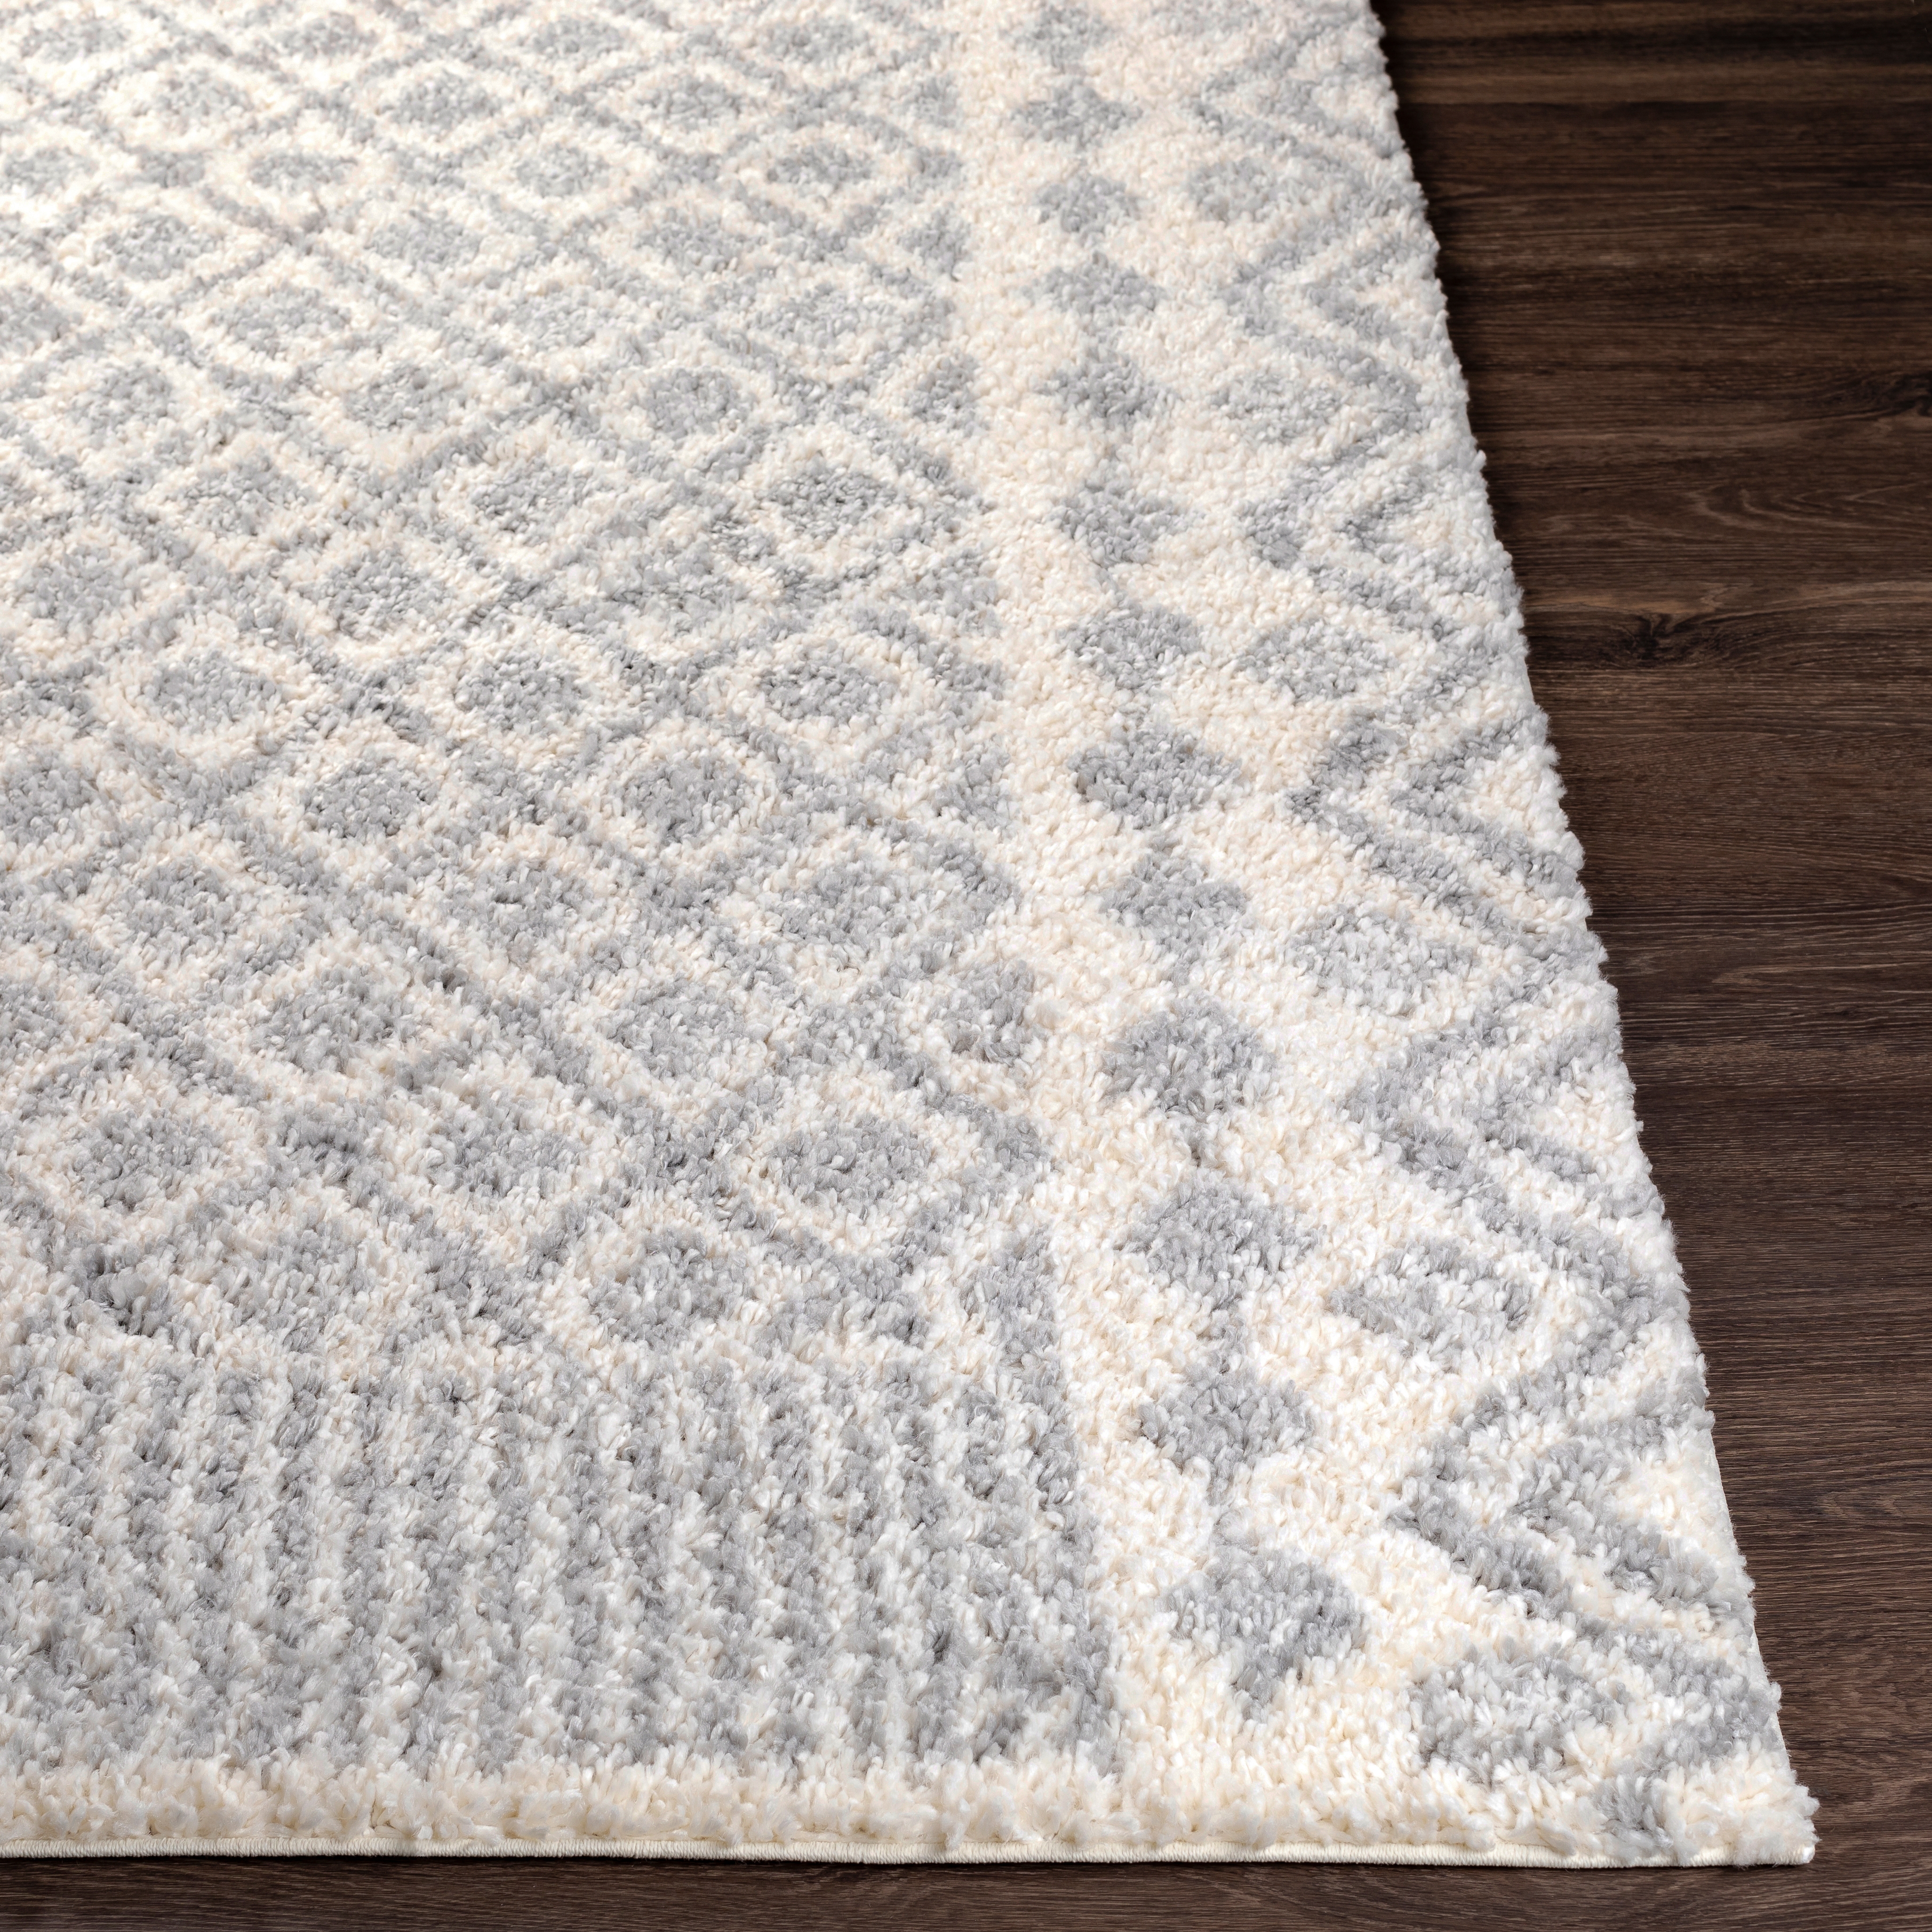 Deluxe Shag Rug, 5'3" x 7'3" - Image 2